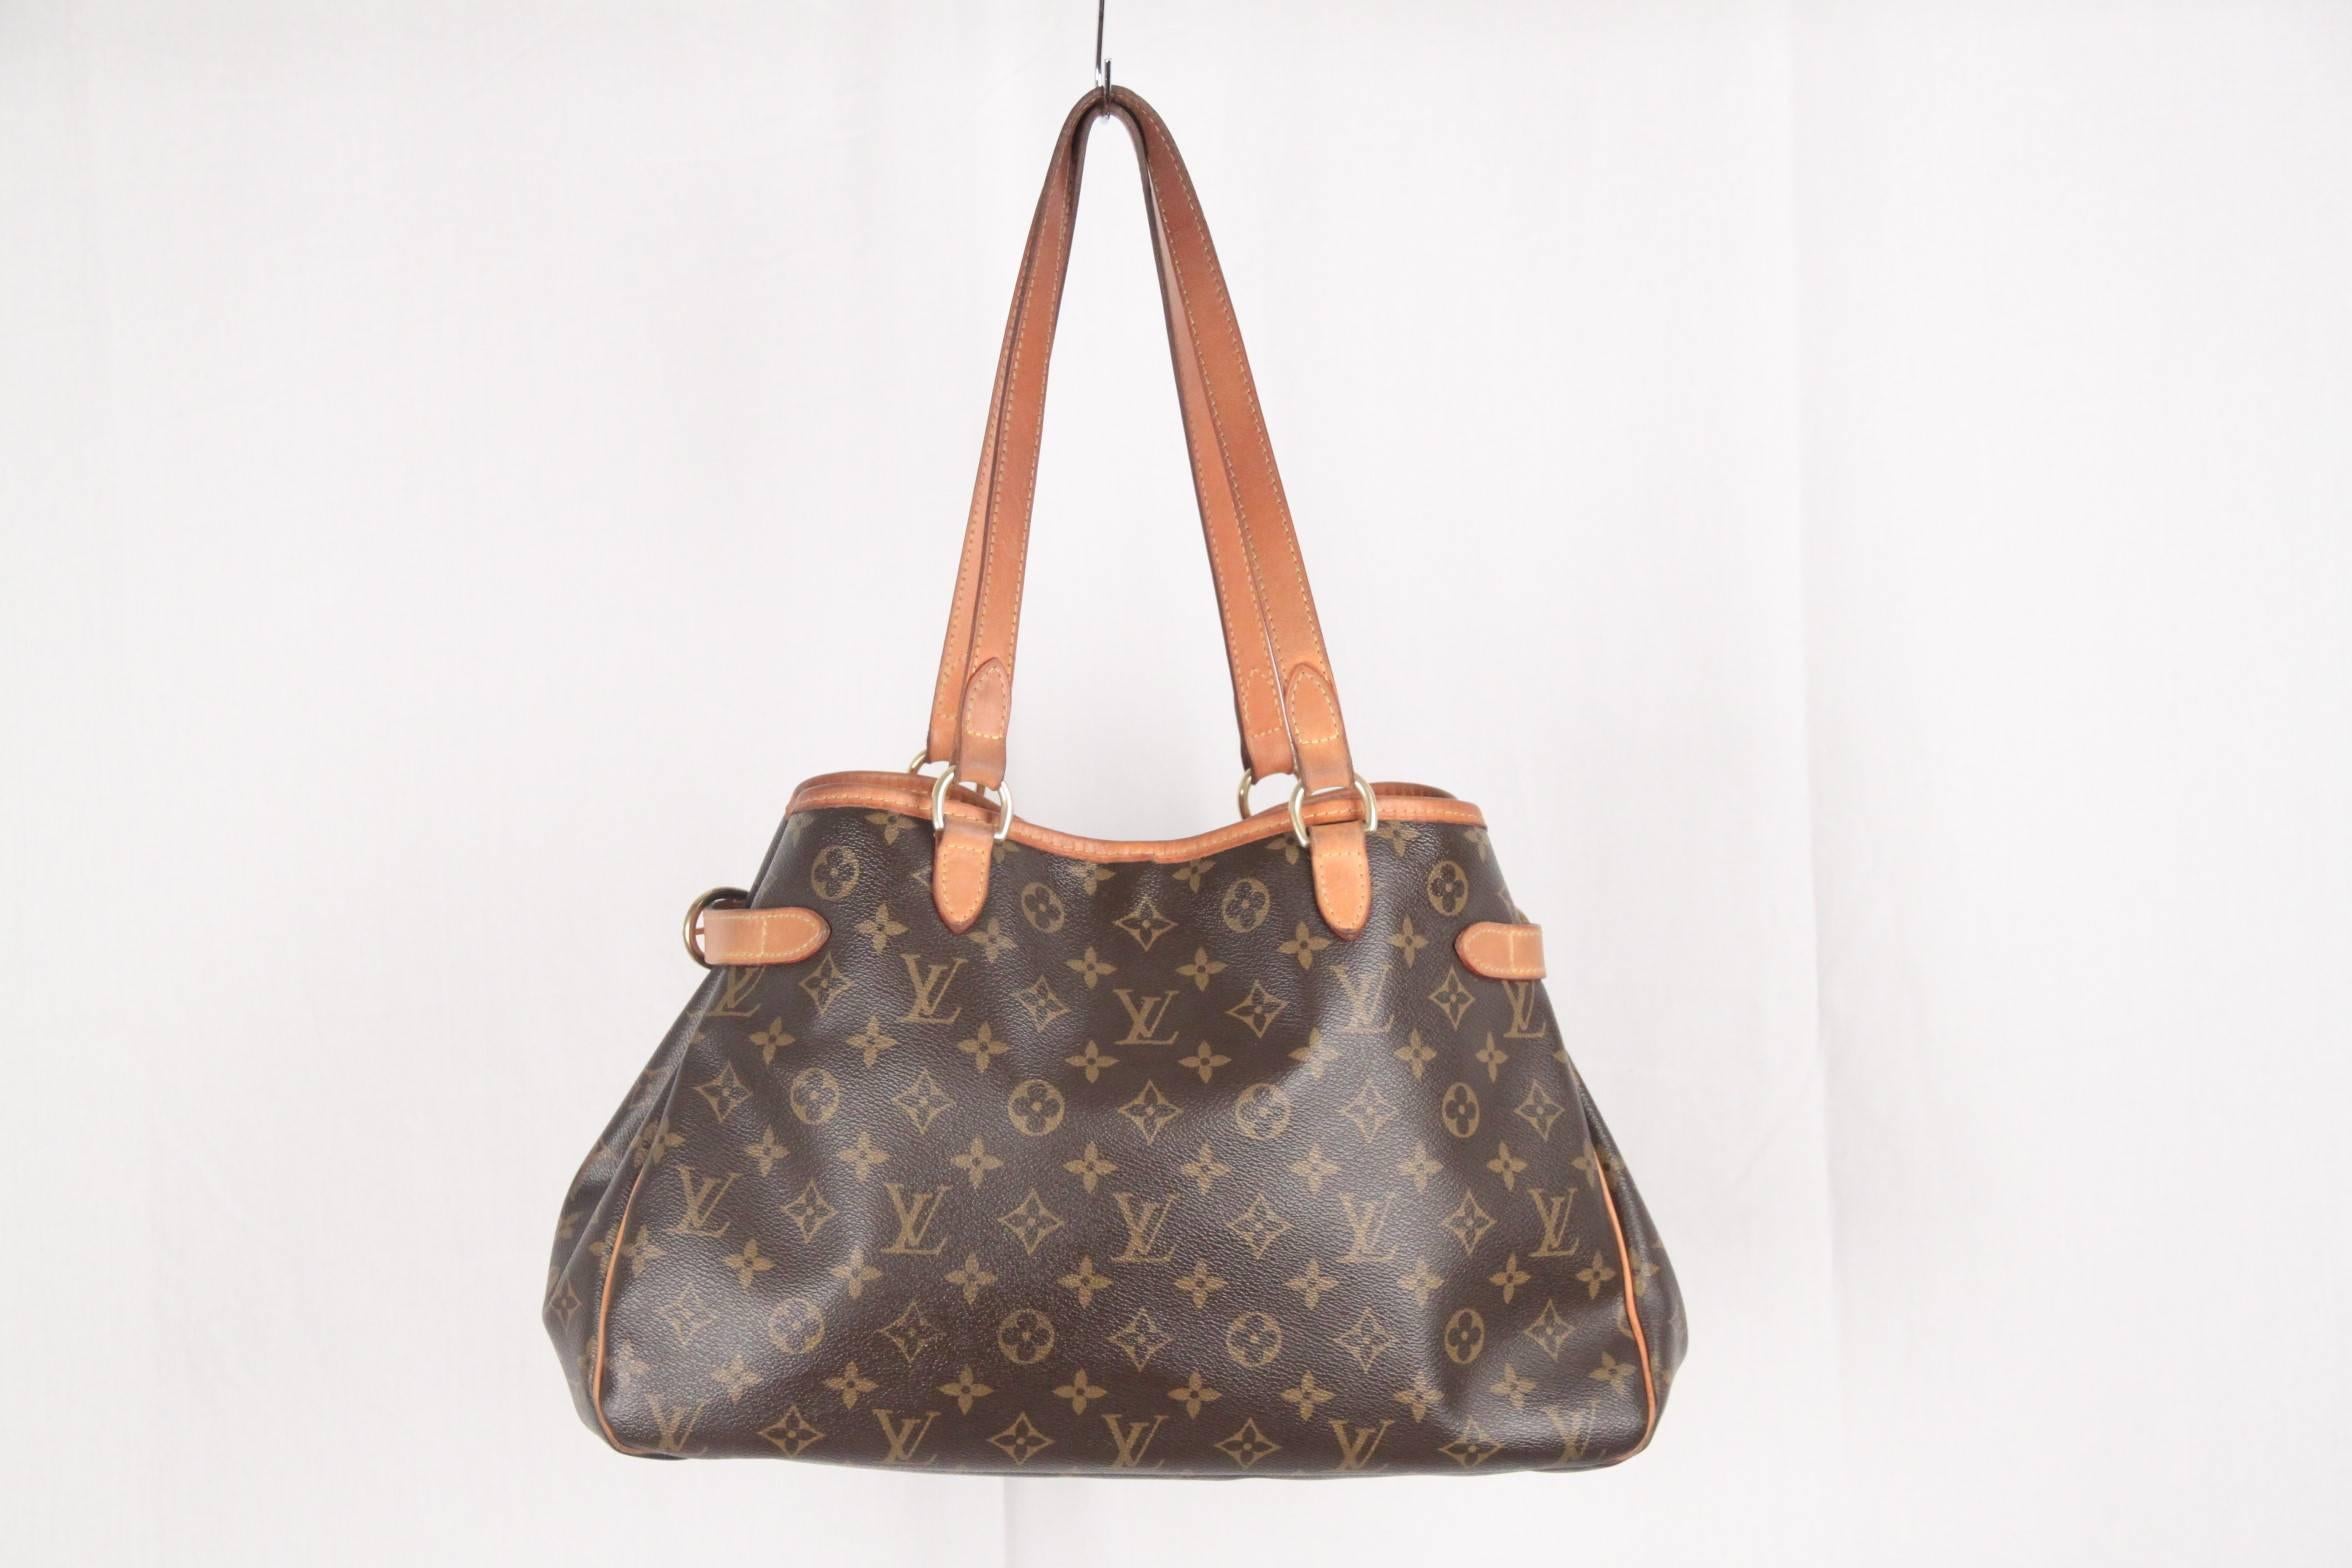 - Brown monogram 'BATIGNOLLES HORIZONTAL' coated canvas tote by Louis Vuitton
- Open top with hook closure in the middle
- Gold metal hardware
- Double top handles
- Open top
- Side buckle detail for expandability 
- Brown canvas lining
- 1 side zip